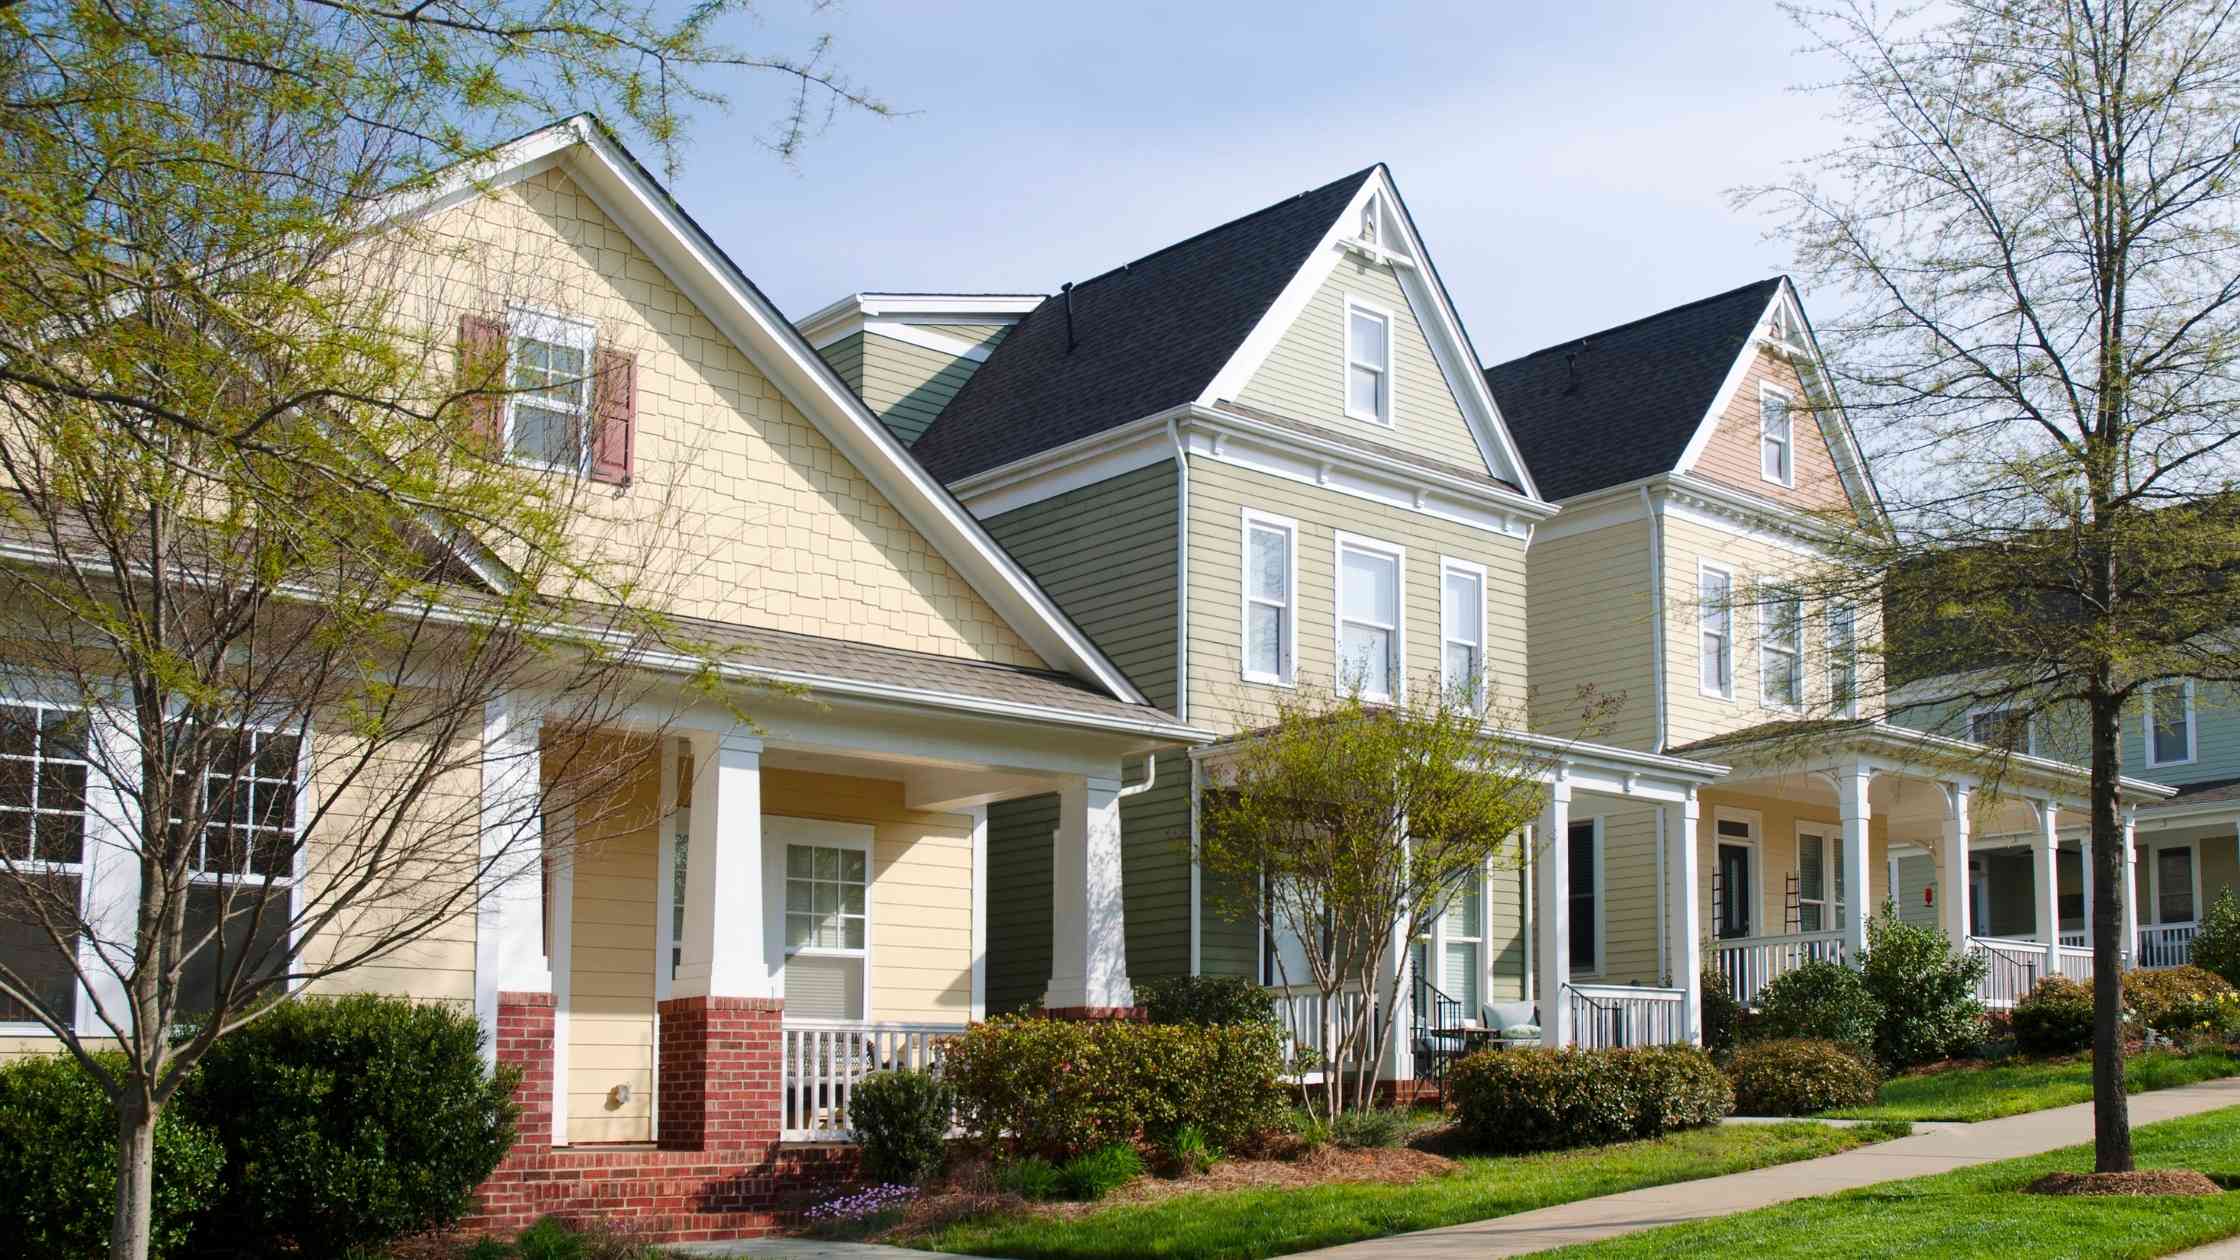 Top 5 Residential Property Types in Nashville